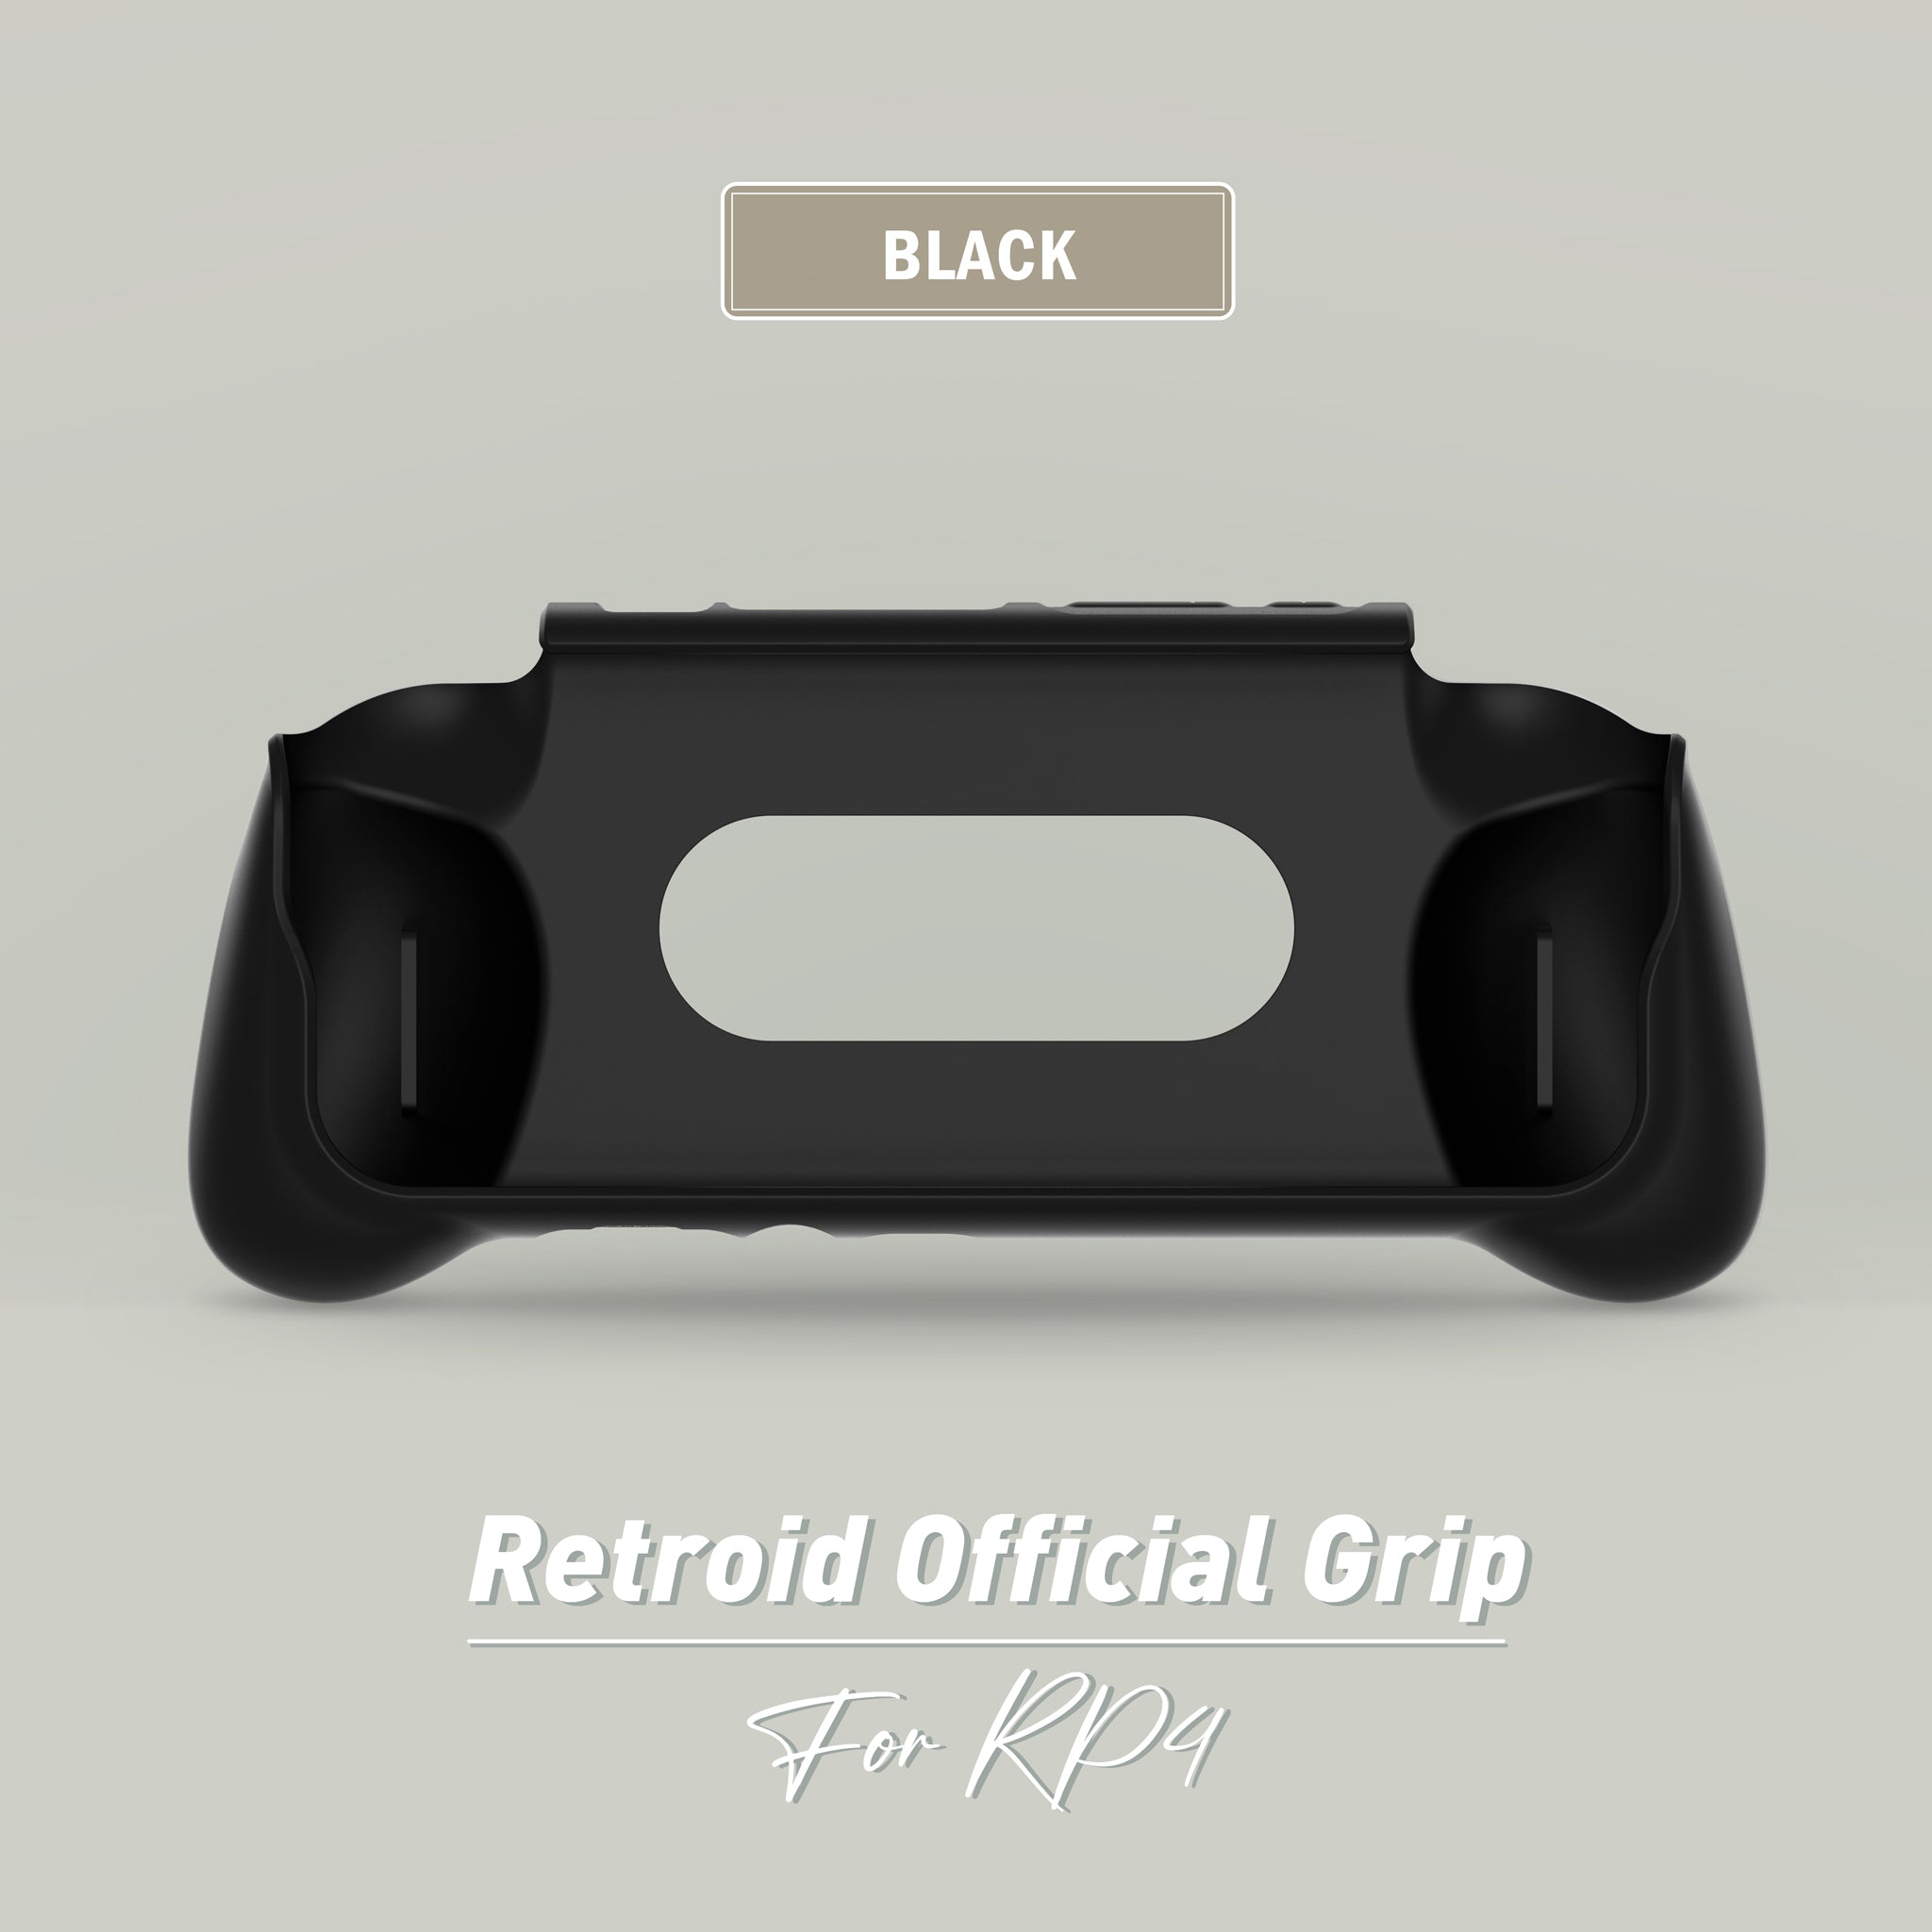 Retroid Official Grip for RP4/4Pro – Retroid Pocket